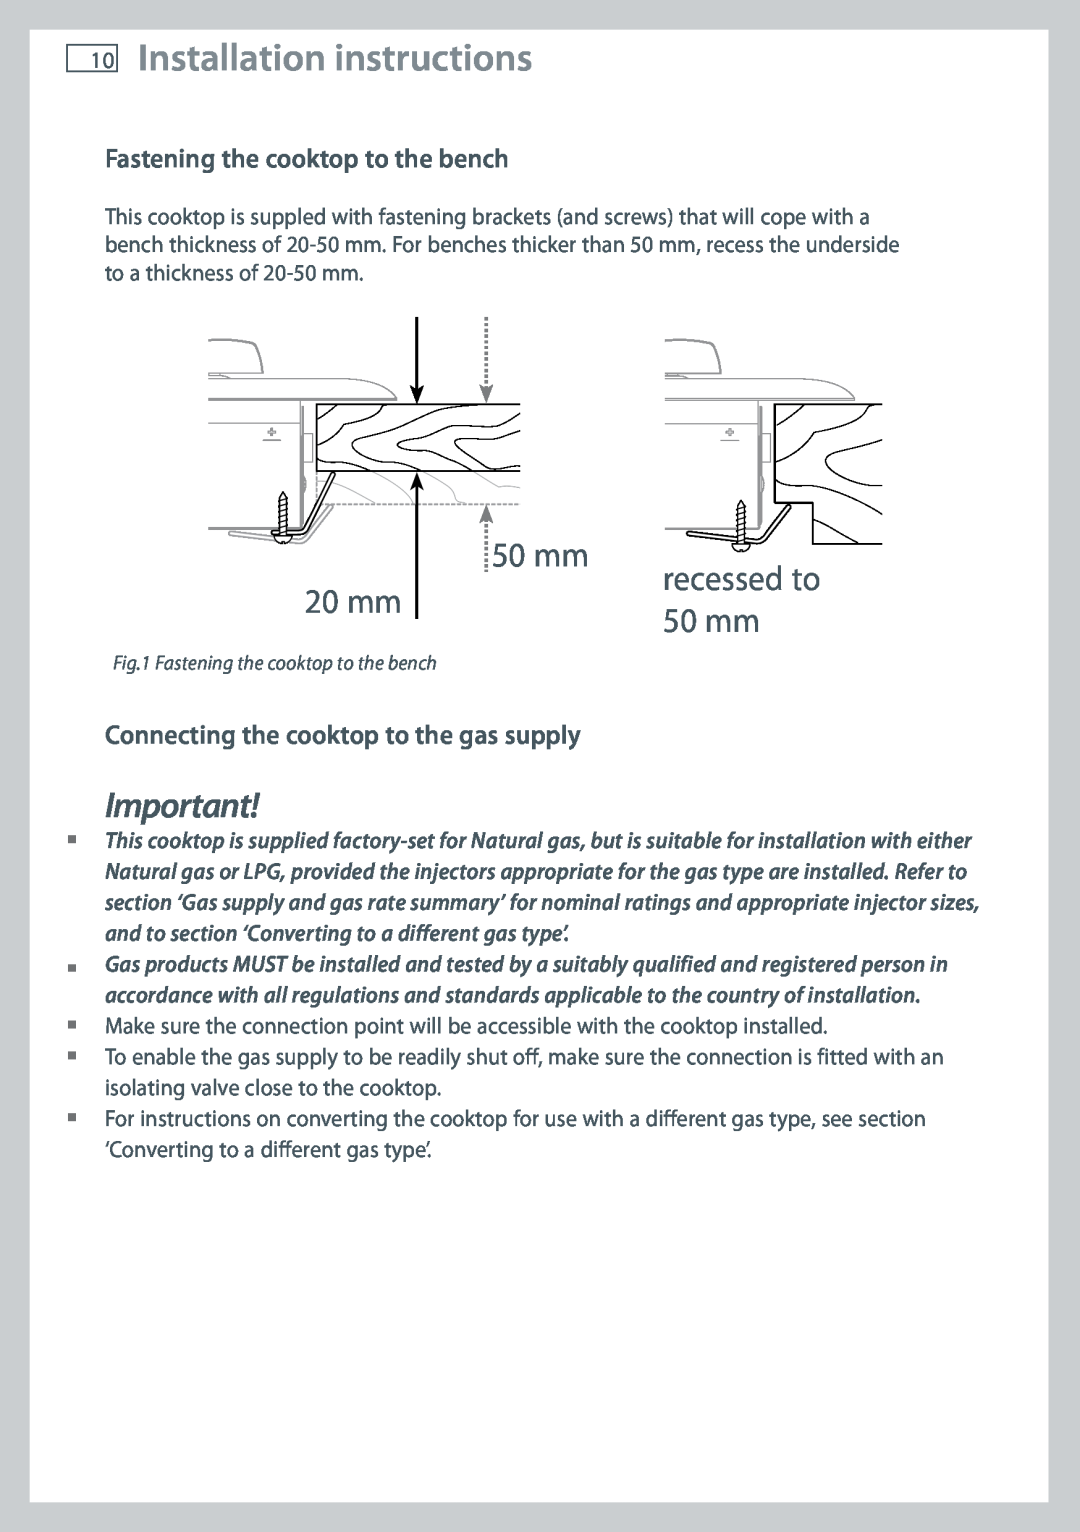 Fisher & Paykel CG905 10Installation instructions, Fastening the cooktop to the bench, 20 mm, recessed to 50 mm 